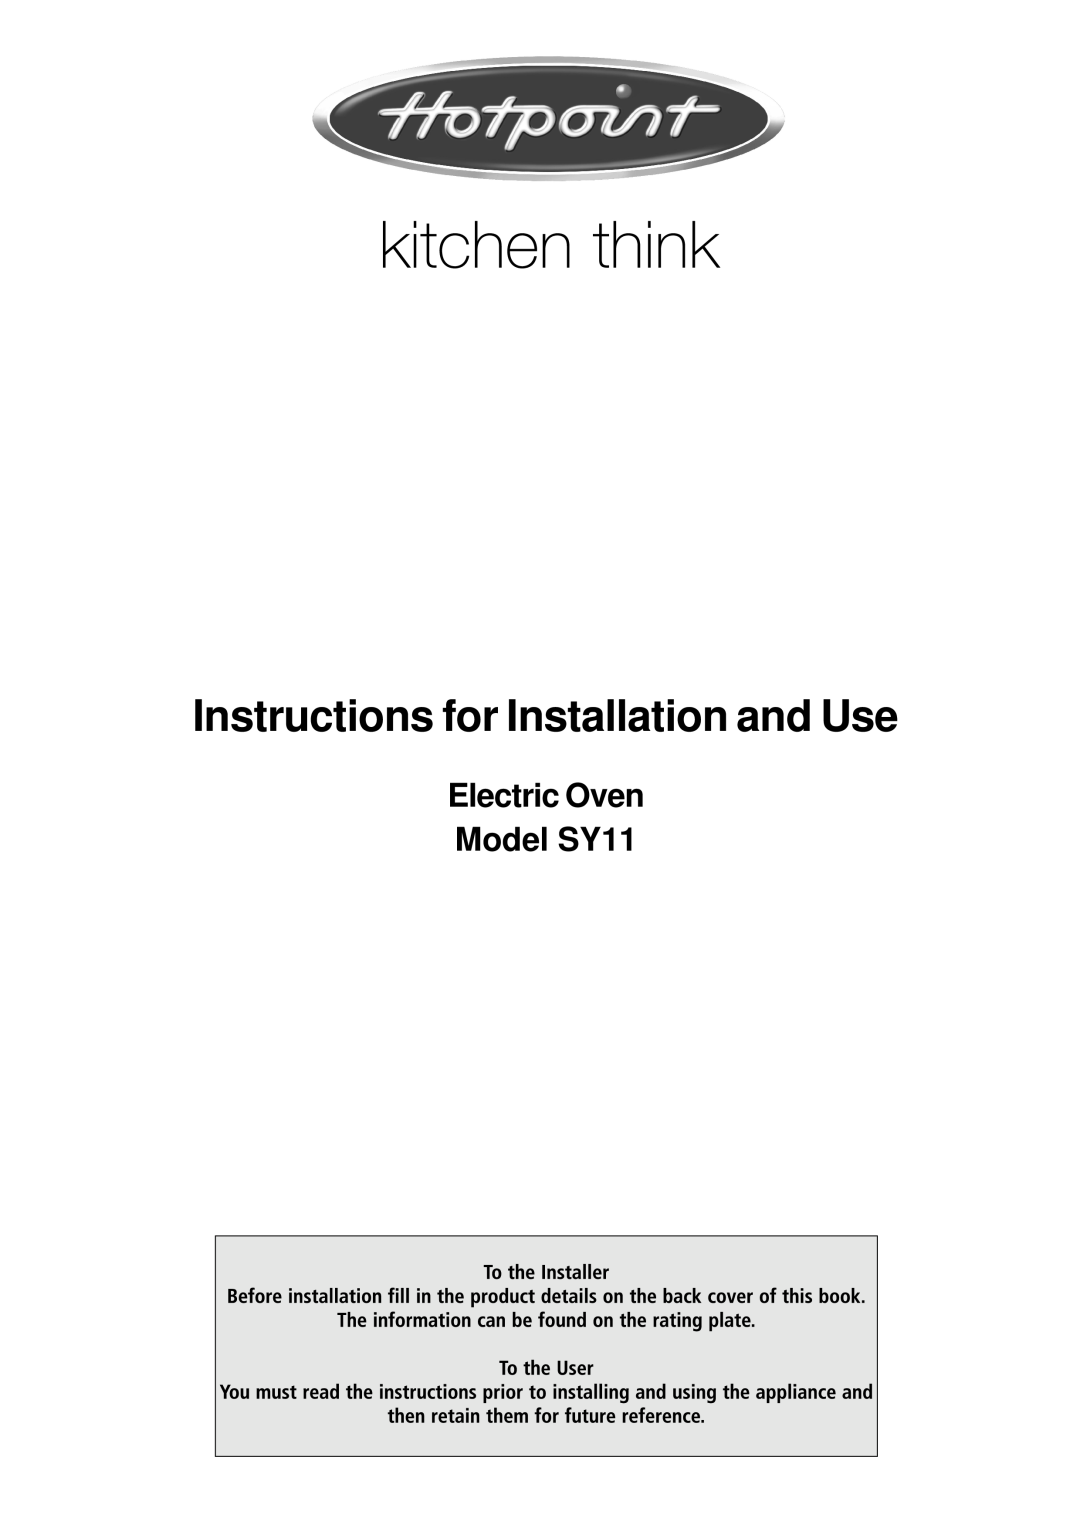 Hotpoint manual Instructions for Installation and Use, Electric Oven Model SY11 